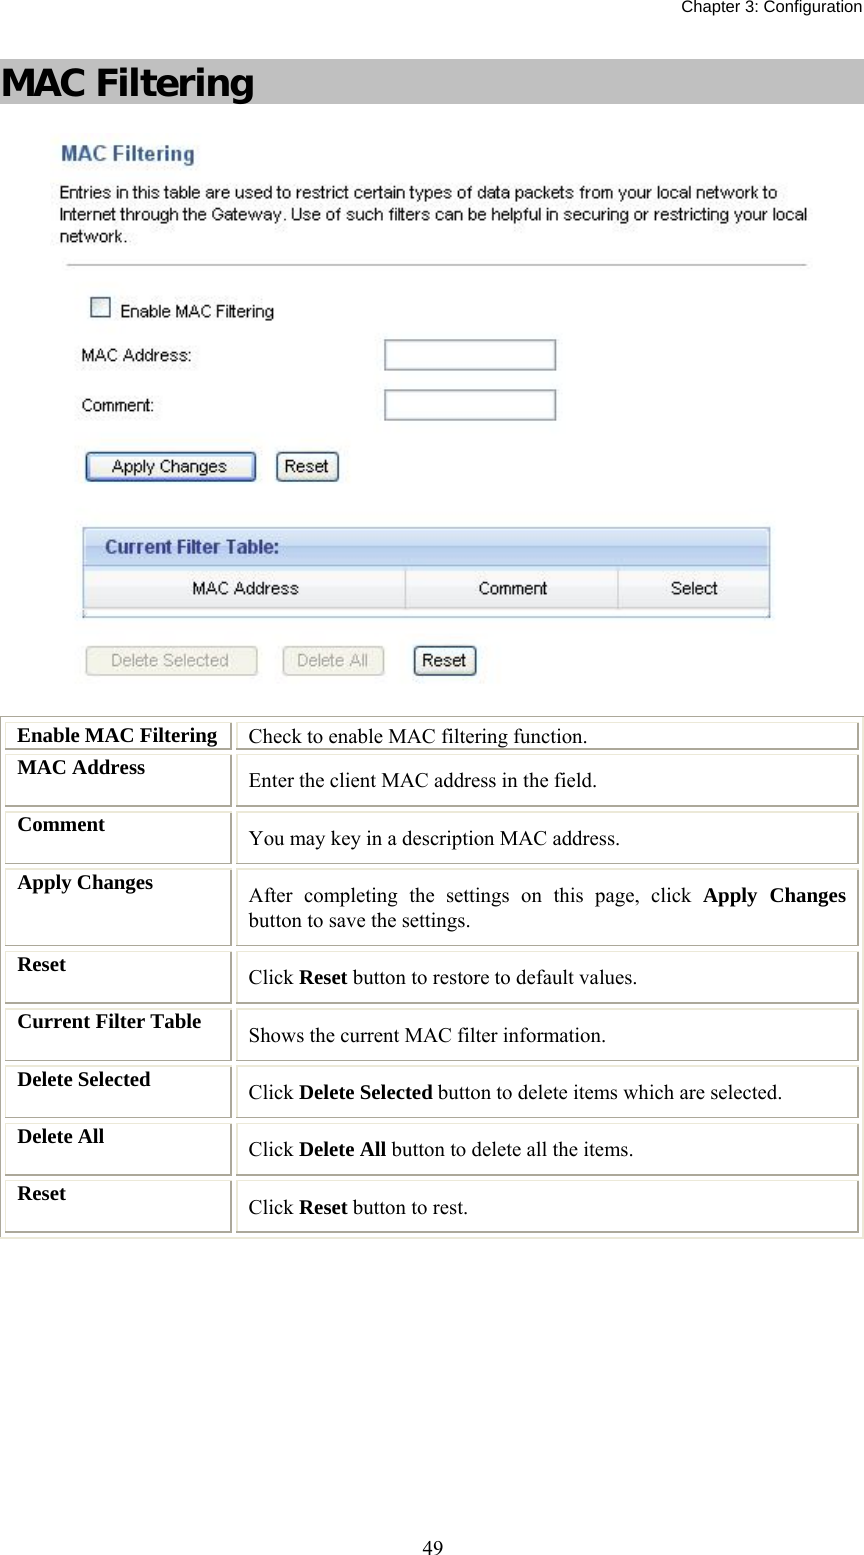   Chapter 3: Configuration  49MAC Filtering  Enable MAC Filtering  Check to enable MAC filtering function. MAC Address  Enter the client MAC address in the field.   Comment  You may key in a description MAC address. Apply Changes  After completing the settings on this page, click Apply Changes button to save the settings. Reset  Click Reset button to restore to default values. Current Filter Table  Shows the current MAC filter information. Delete Selected  Click Delete Selected button to delete items which are selected. Delete All  Click Delete All button to delete all the items. Reset  Click Reset button to rest.  